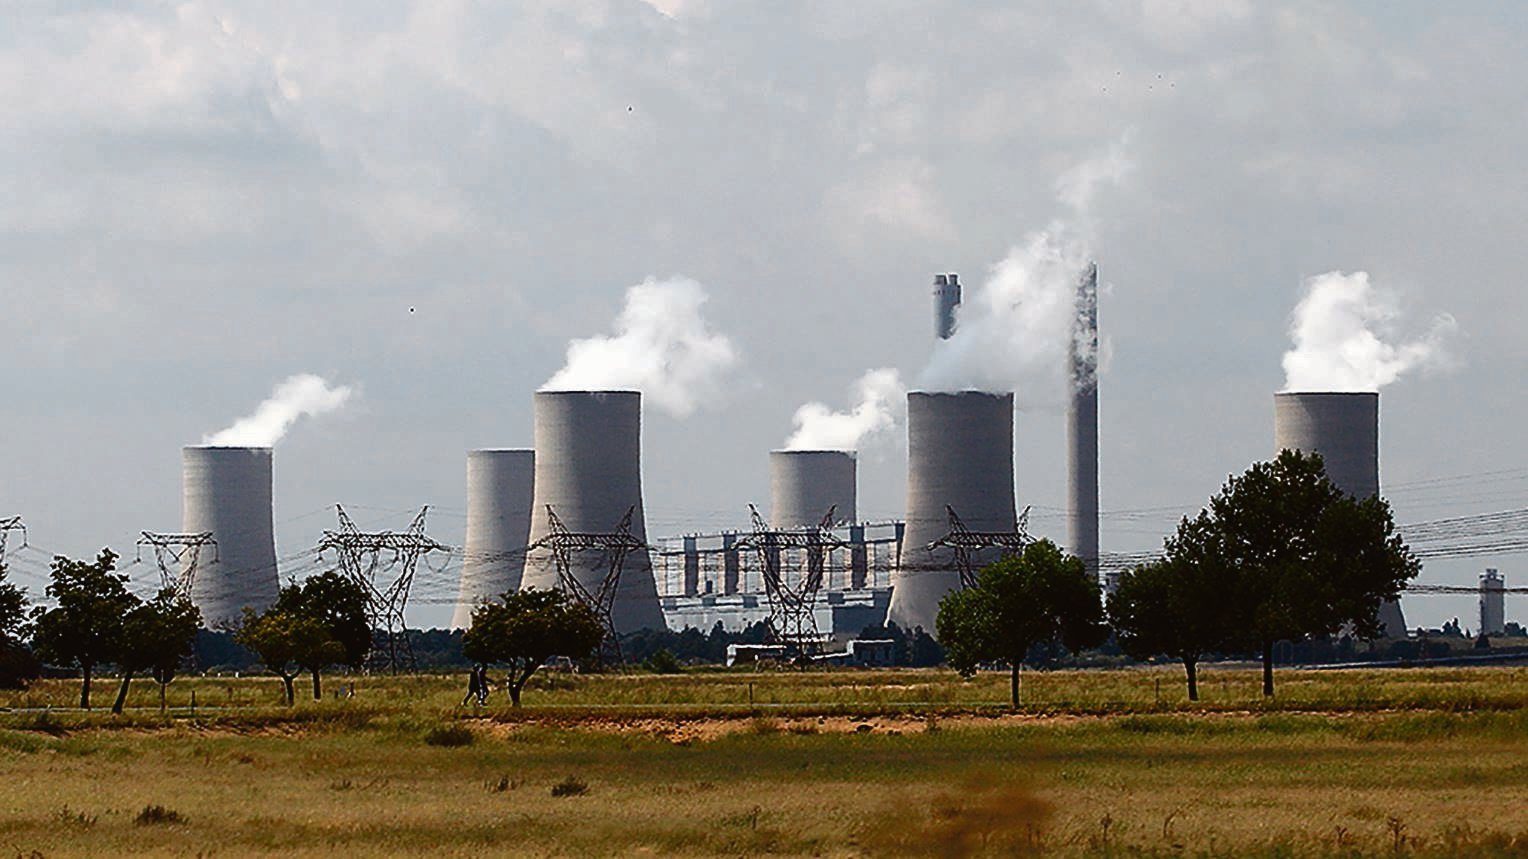 Eskom released its results for the first six months of the financial year on Wednesday.